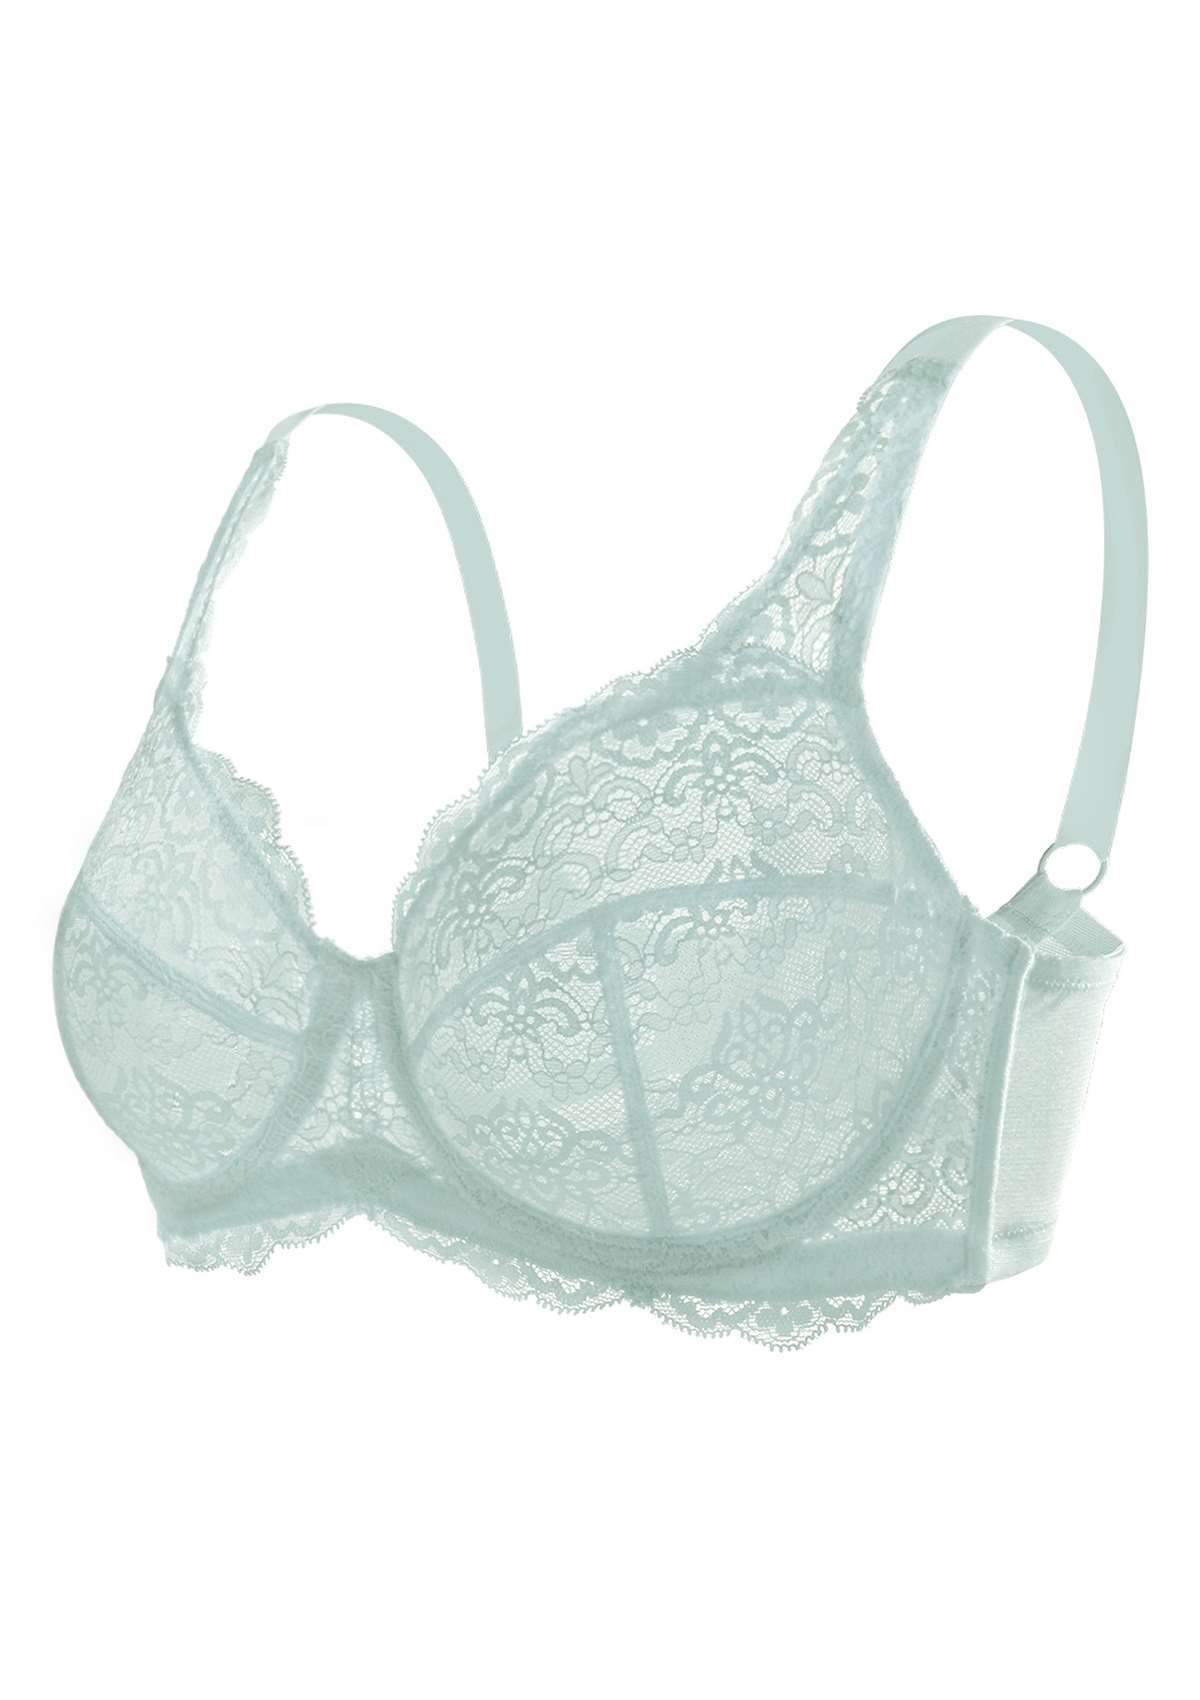 HSIA All-Over Floral Lace: Best Bra For Elderly With Sagging Breasts - Crystal Blue / 34 / C